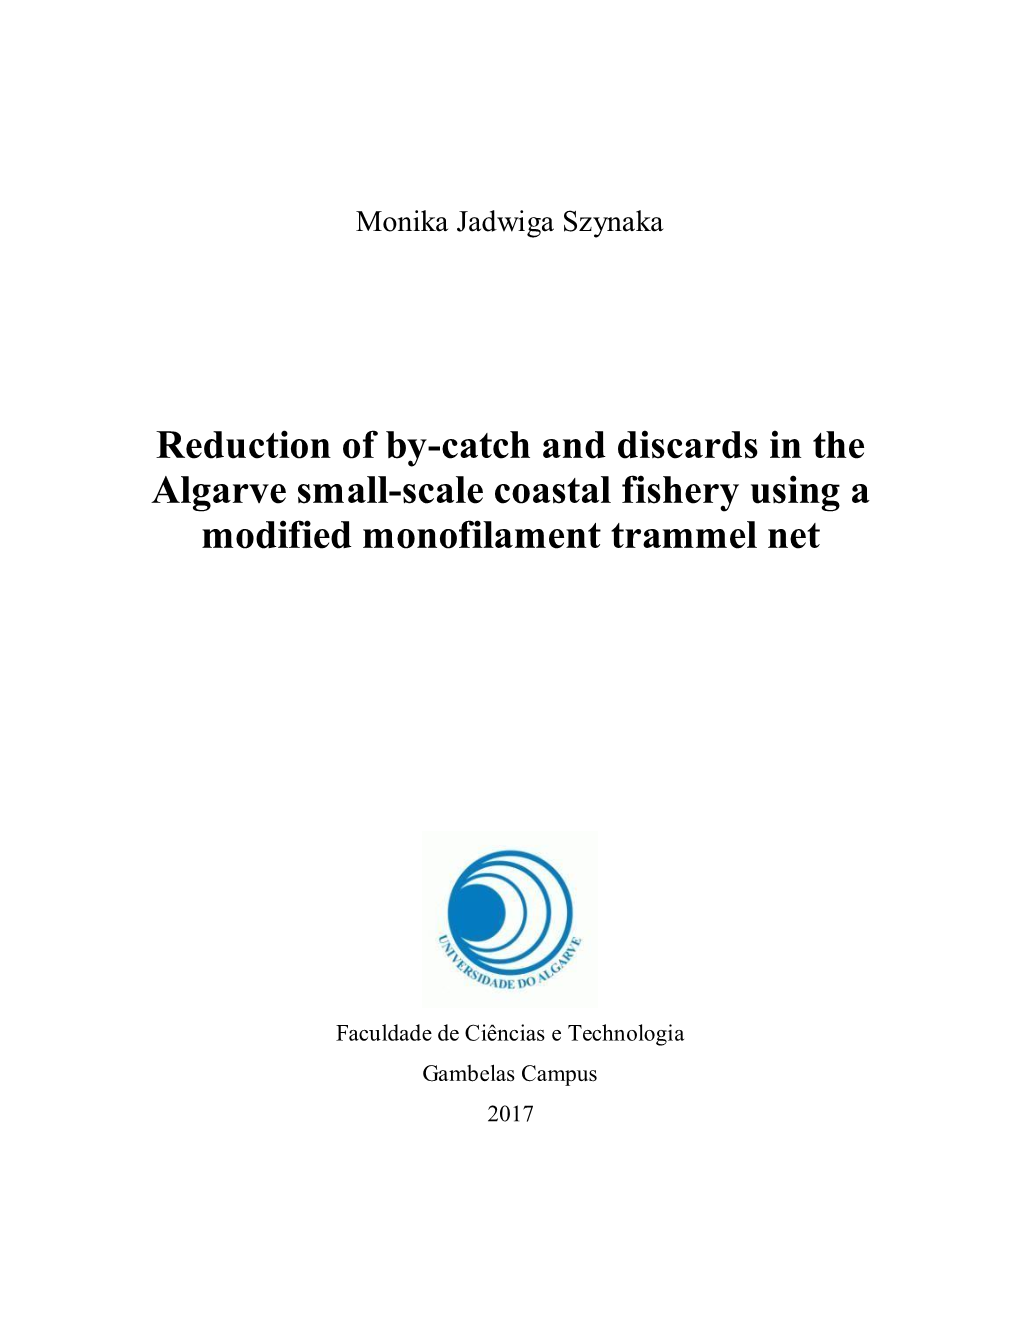 Reduction of By-Catch and Discards in the Algarve Small-Scale Coastal Fishery Using a Modified Monofilament Trammel Net